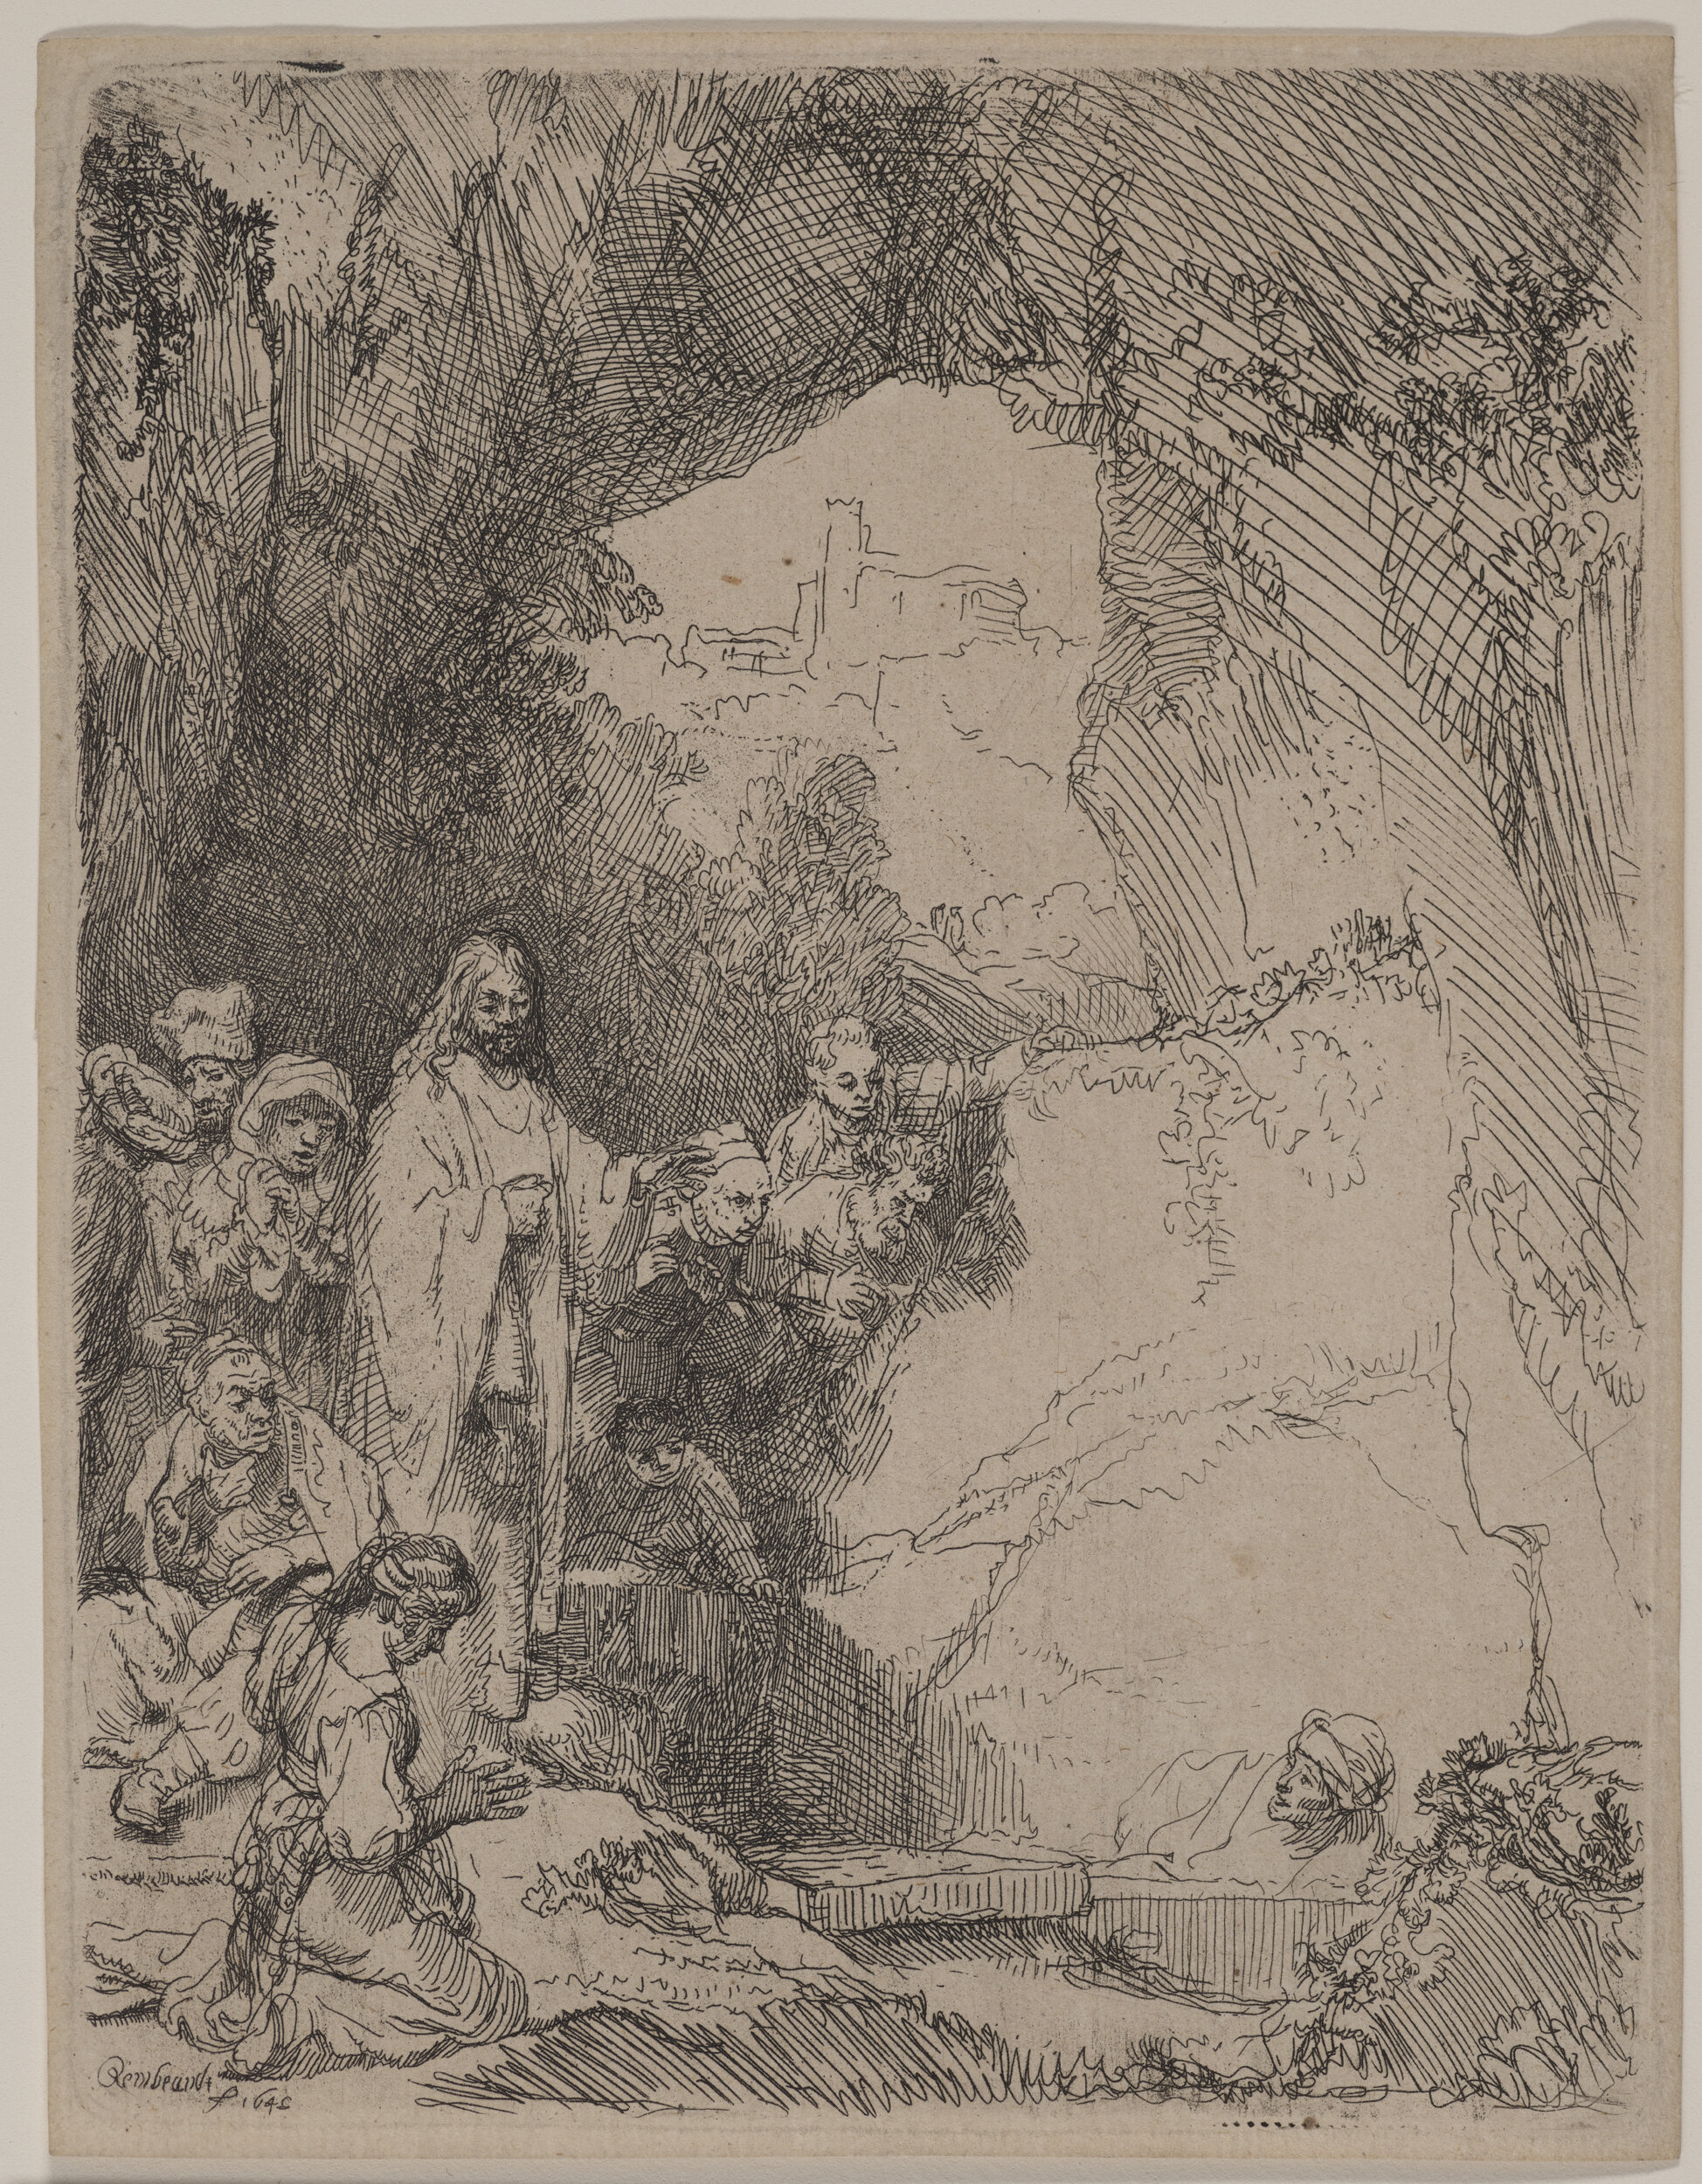  Rembrandt Harmensz van Rijn, The Raising of Lazarus, 1642, etching on paper, Museum Purchase: Funds provided by the Graphic Arts Council and the Print Acquisition Fund, public domain, 2018.22.1 